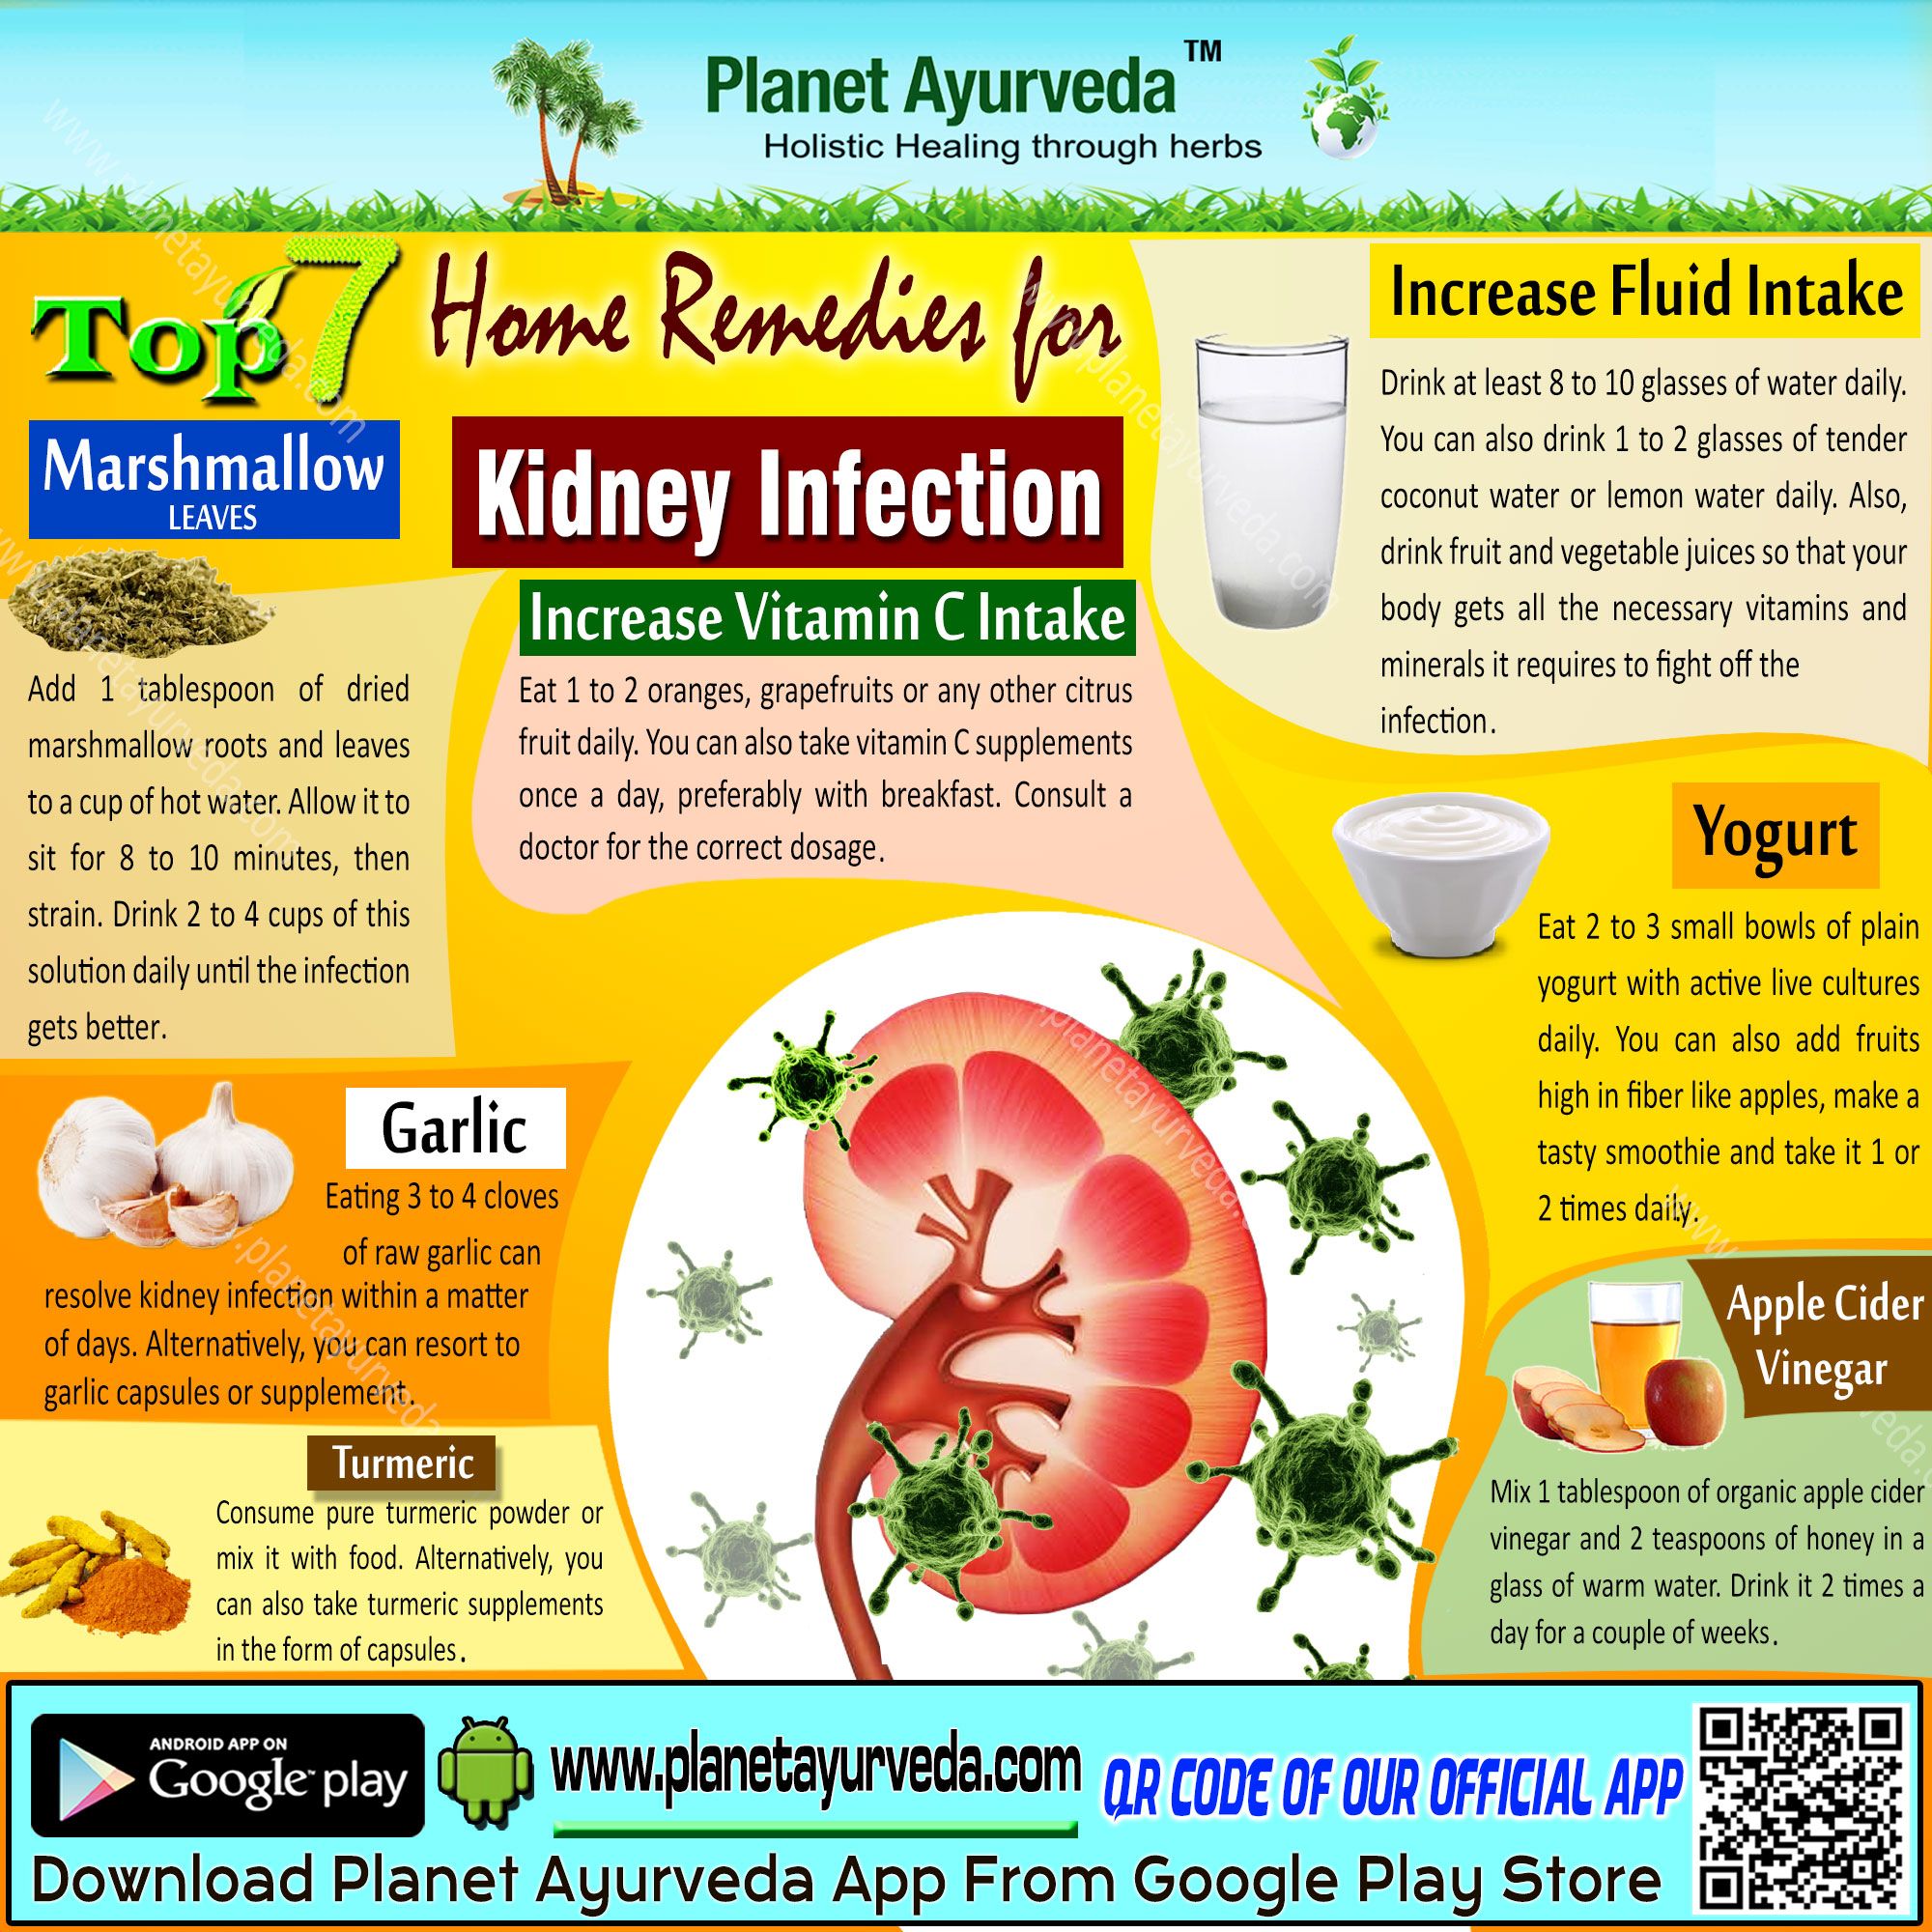 Top 7 #Home #Remedies For #Kidney #Infection #increasevitamin # ...